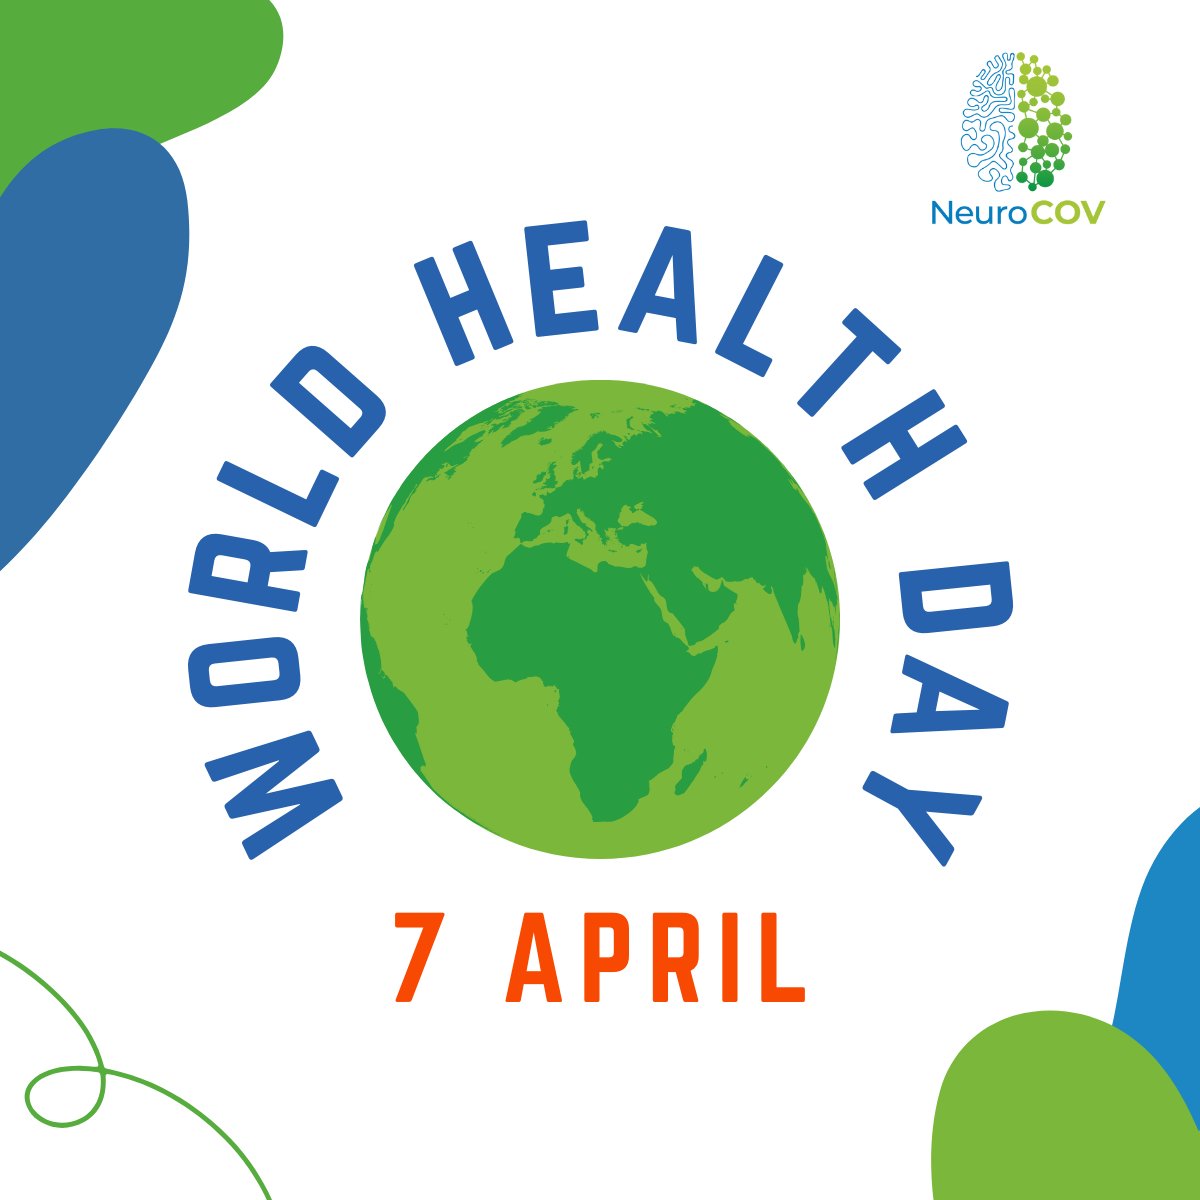 ✨Happy #WorldHealthDay from the #NeuroCOV team! Join us on our mission to enable therapies for #NeuroCOVID and help many around the world fully attain their right to health. 🌐Learn more here: neurocov.eu #MyHealthMyRight #LongCOVID